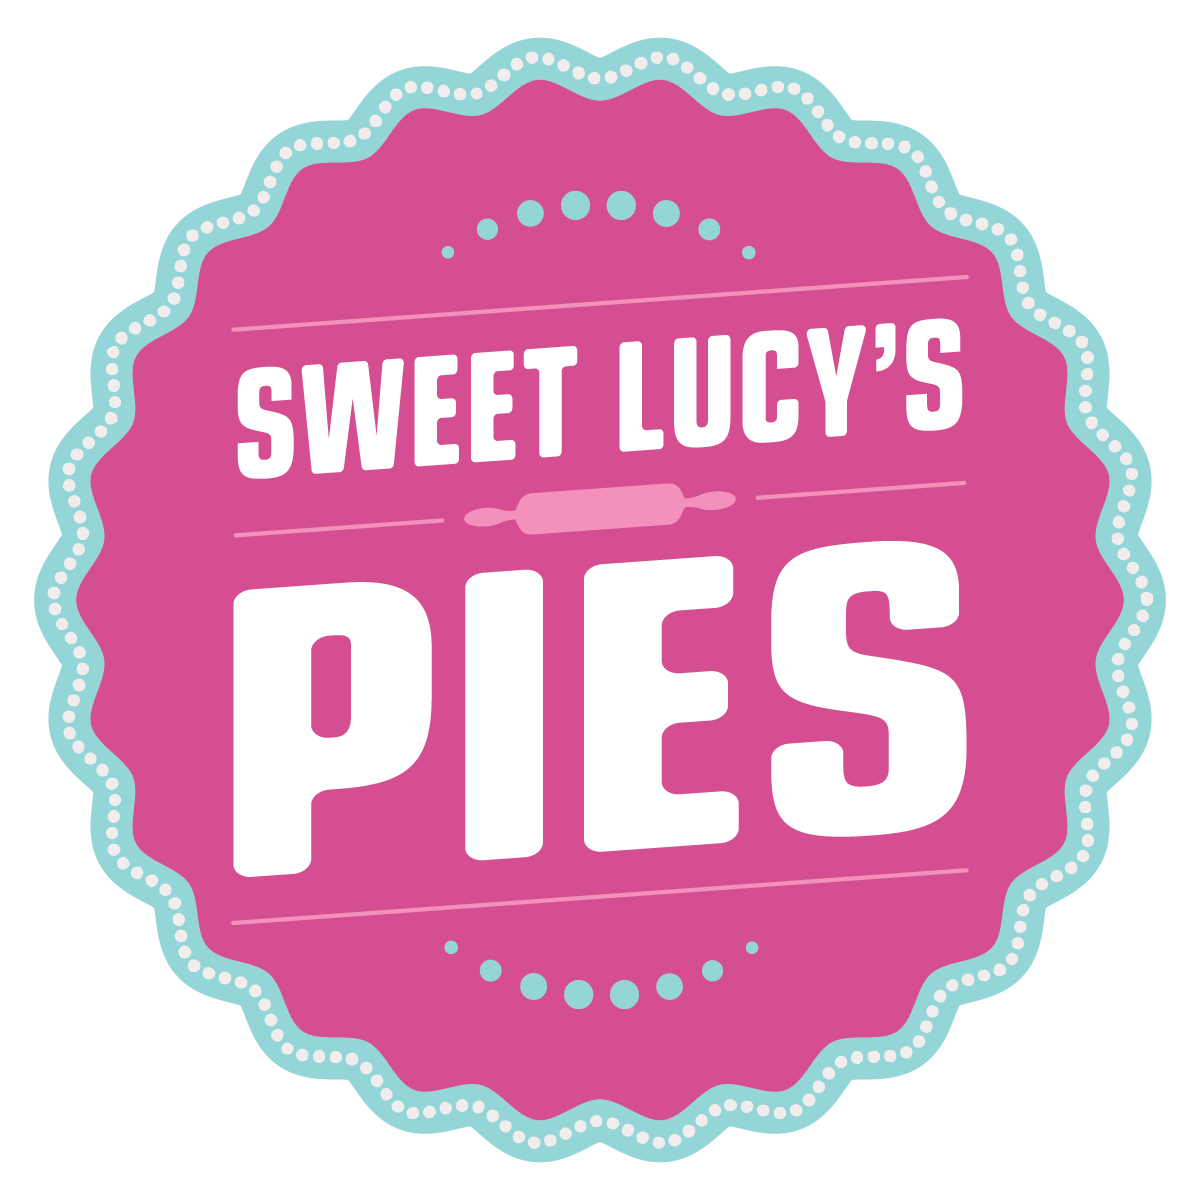 Sweet Lucy's Pies